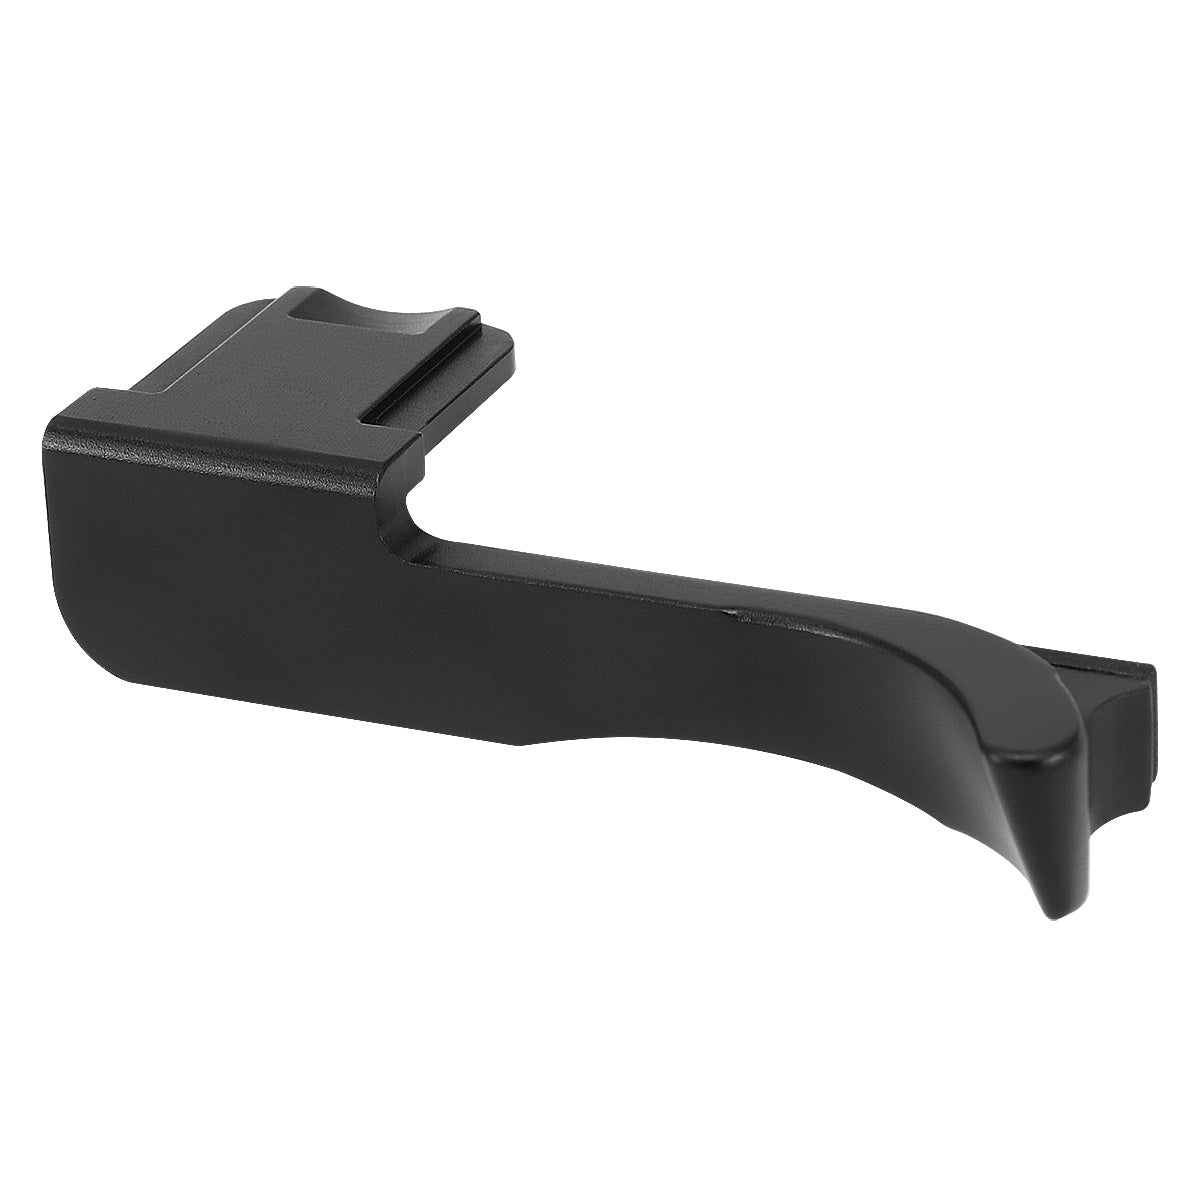 Haoge THB-CB Metal Hot Shoe Thumb Up Rest Thumbs Up Hand Grip for Leica CL Camera Black